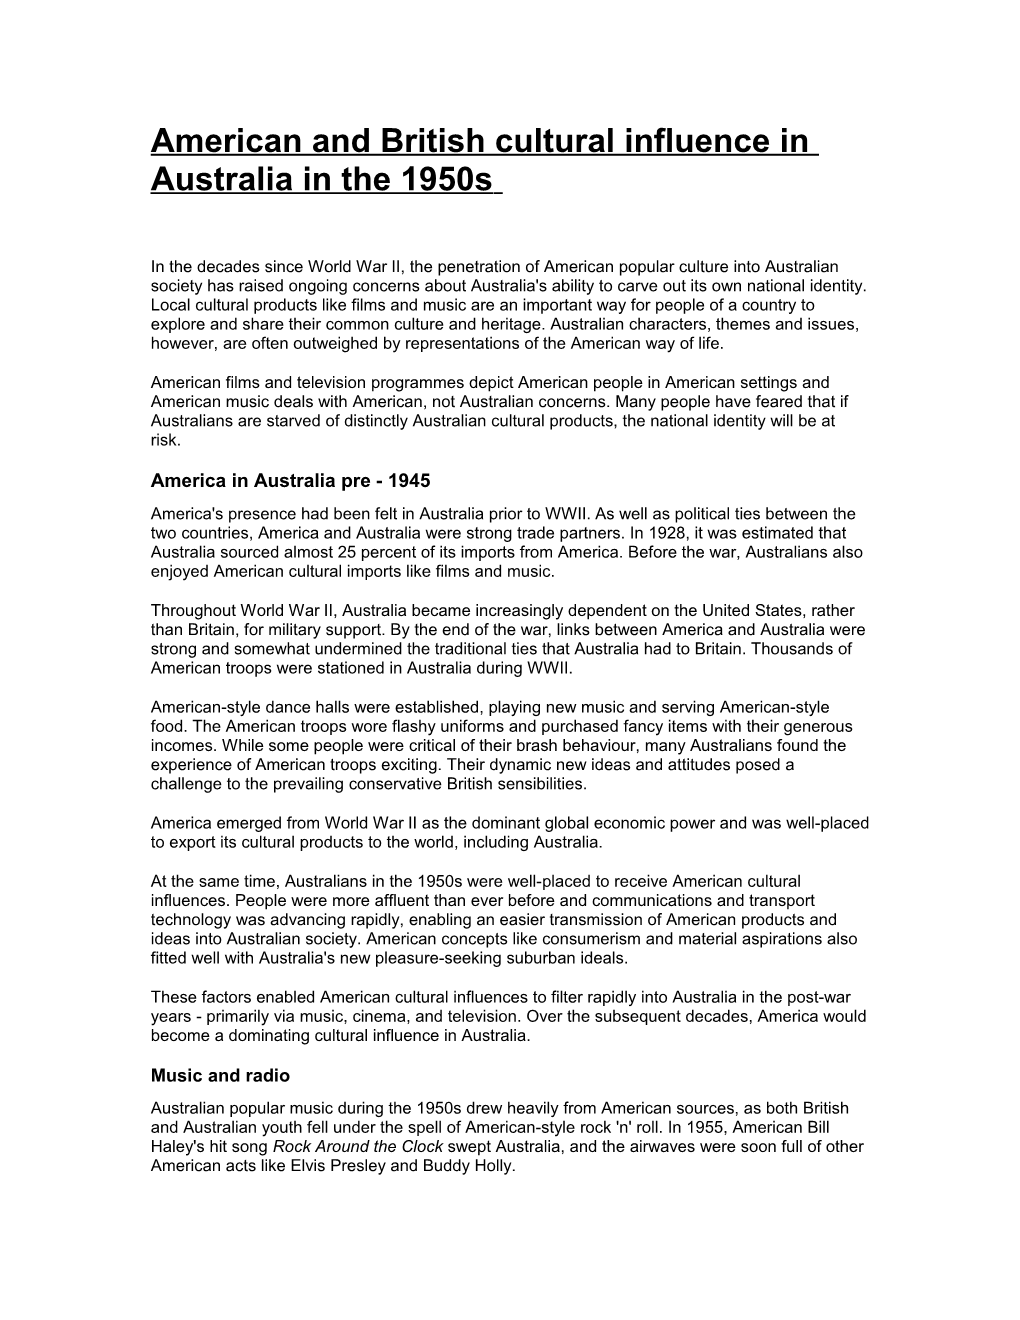 American and British Cultural Influence in Australia in the 1950S